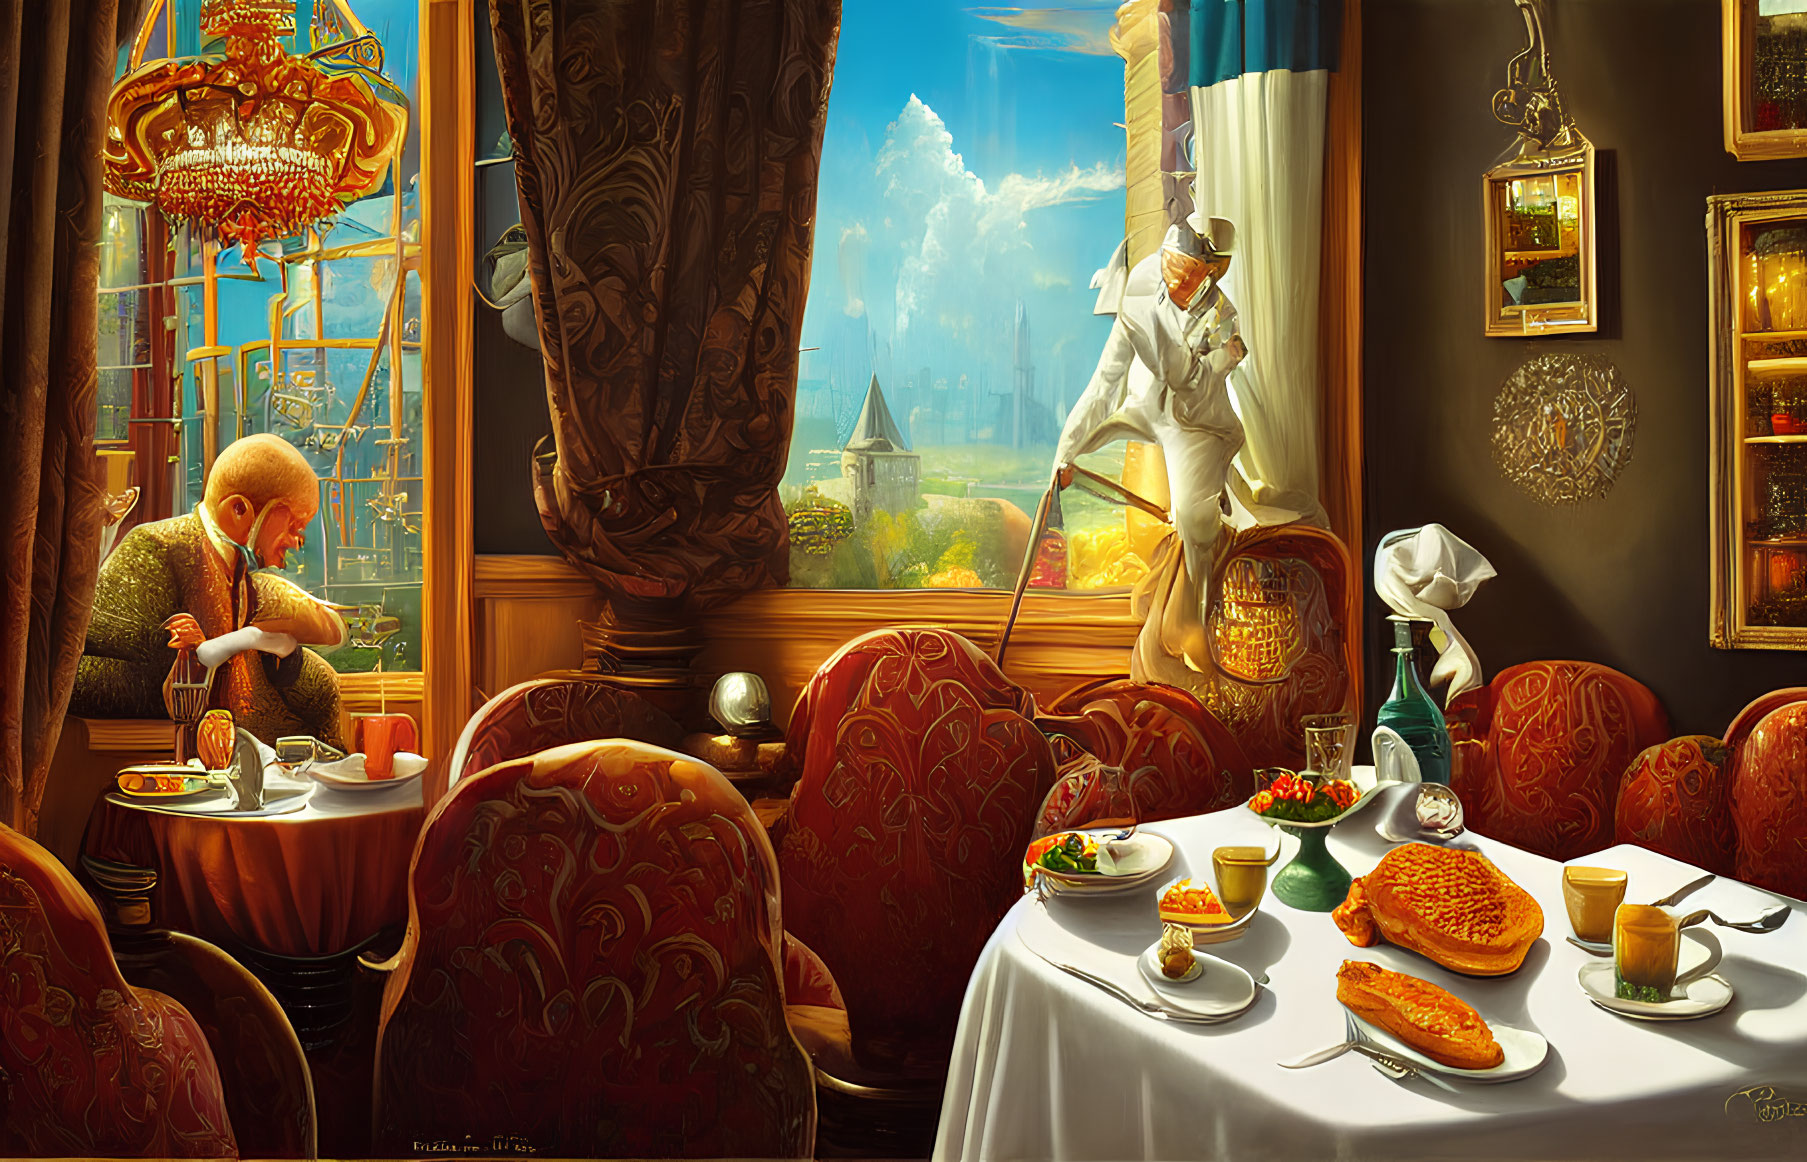 Luxurious room with man reading newspaper, sunlight, paintings, chandelier, futuristic city view